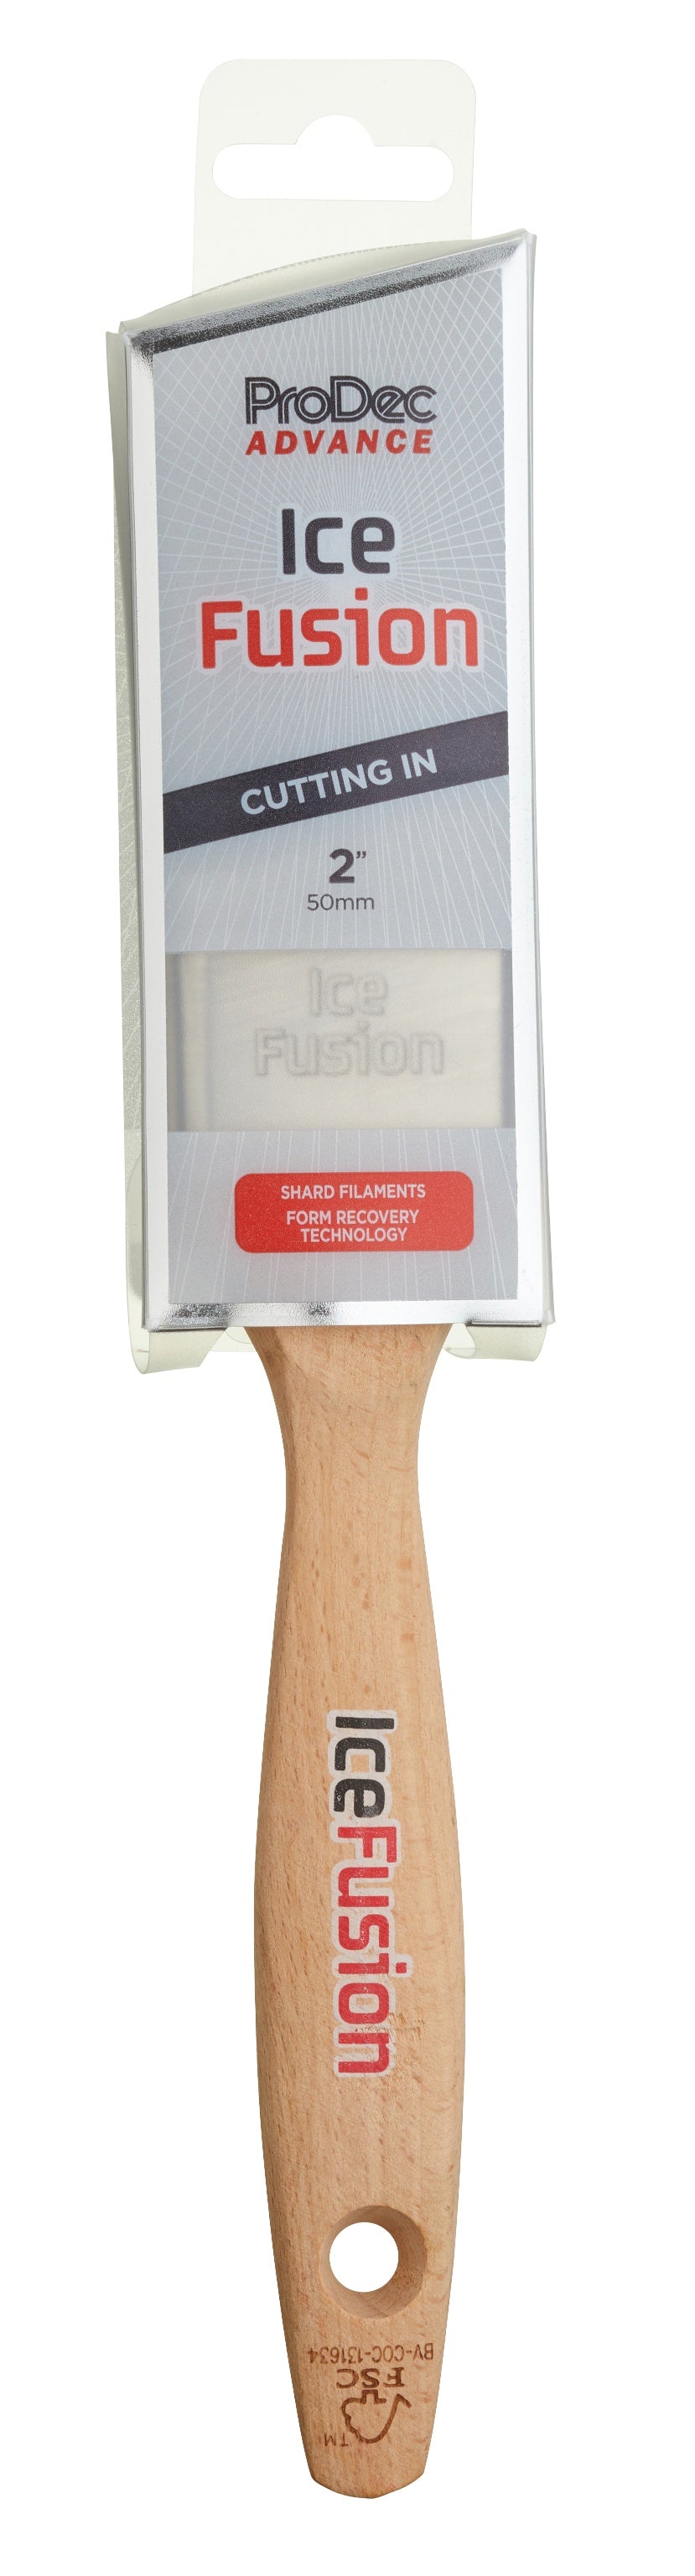 Prodec Advance Ice Fusion Cutting In Angled Paint Brush